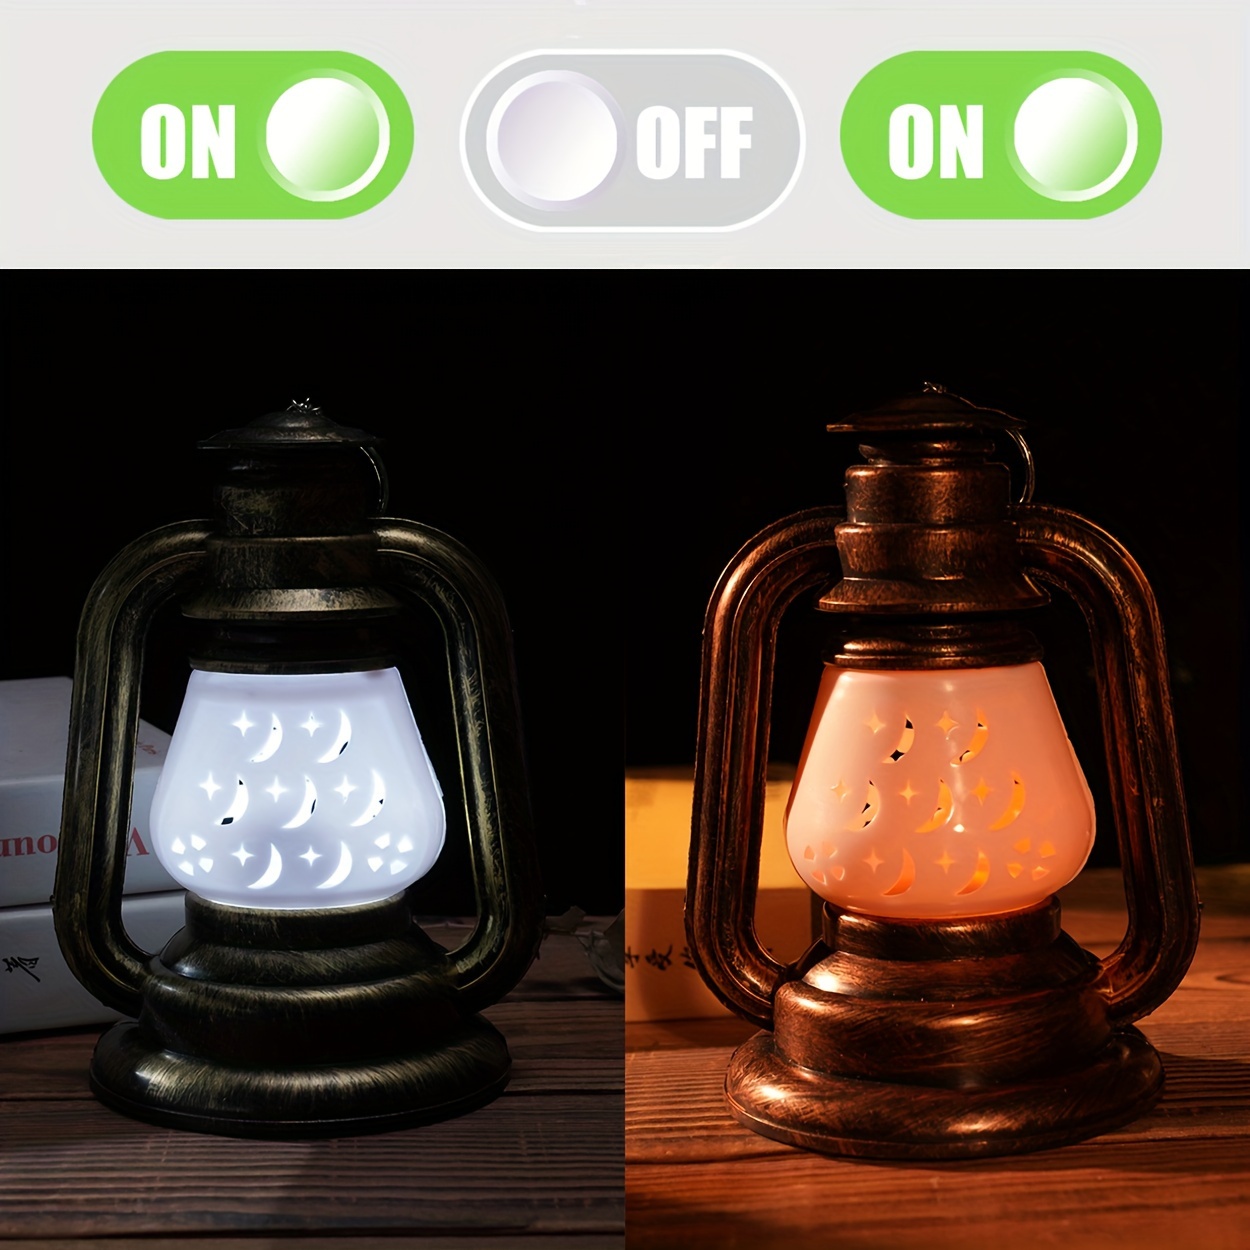 Indoor Lantern for use during hurricane power outages